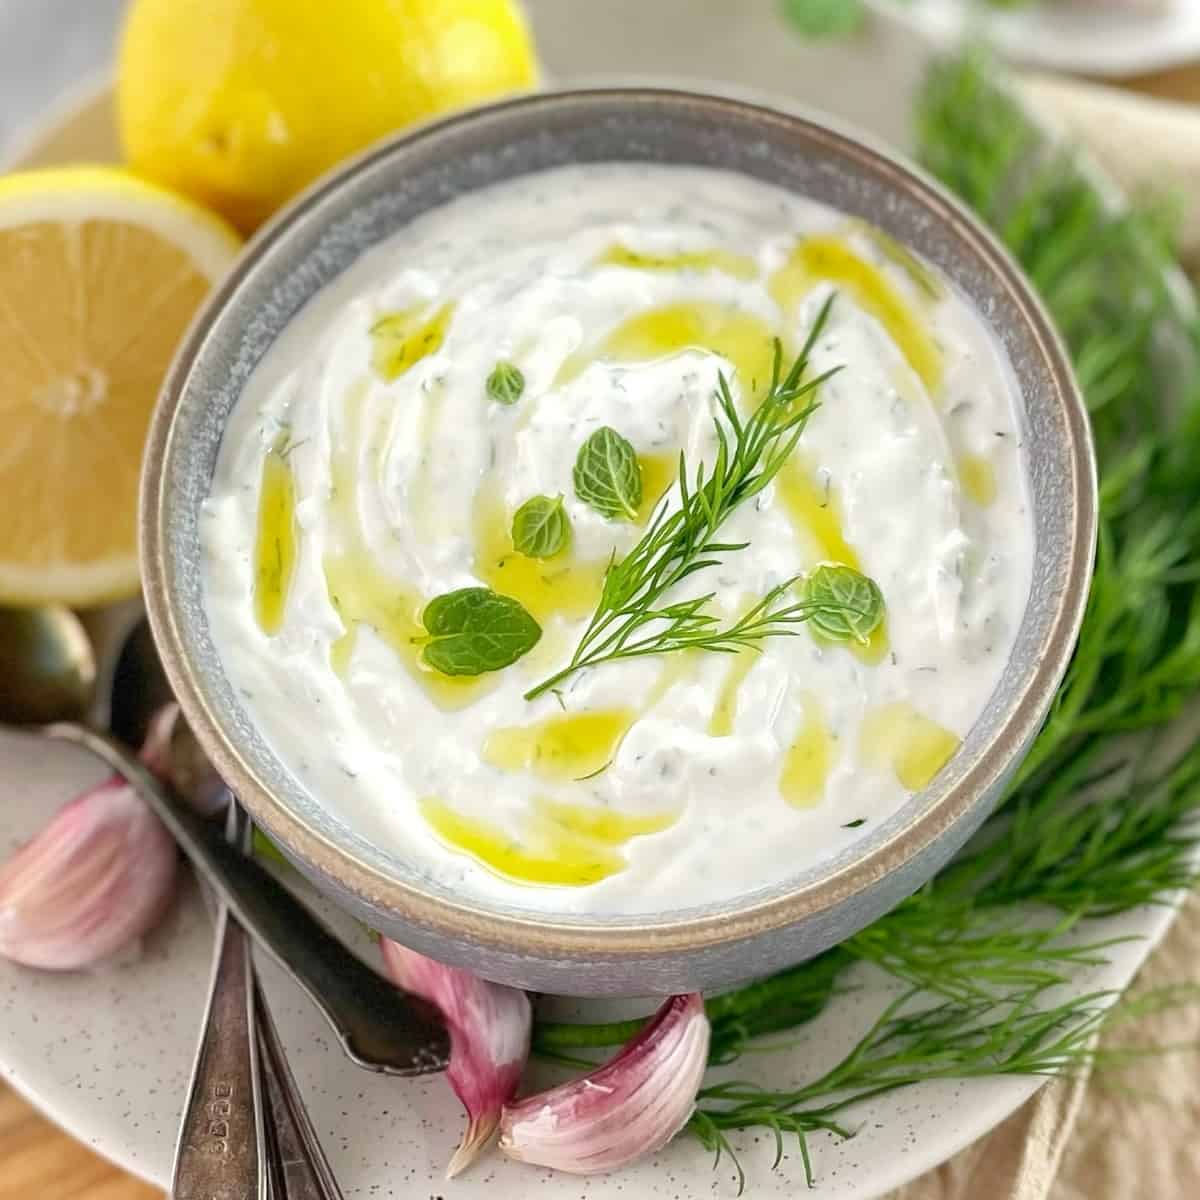 Turkish yogurt sauce in a gray bowl with mint dill lemon and garlic sitting on a wooden board